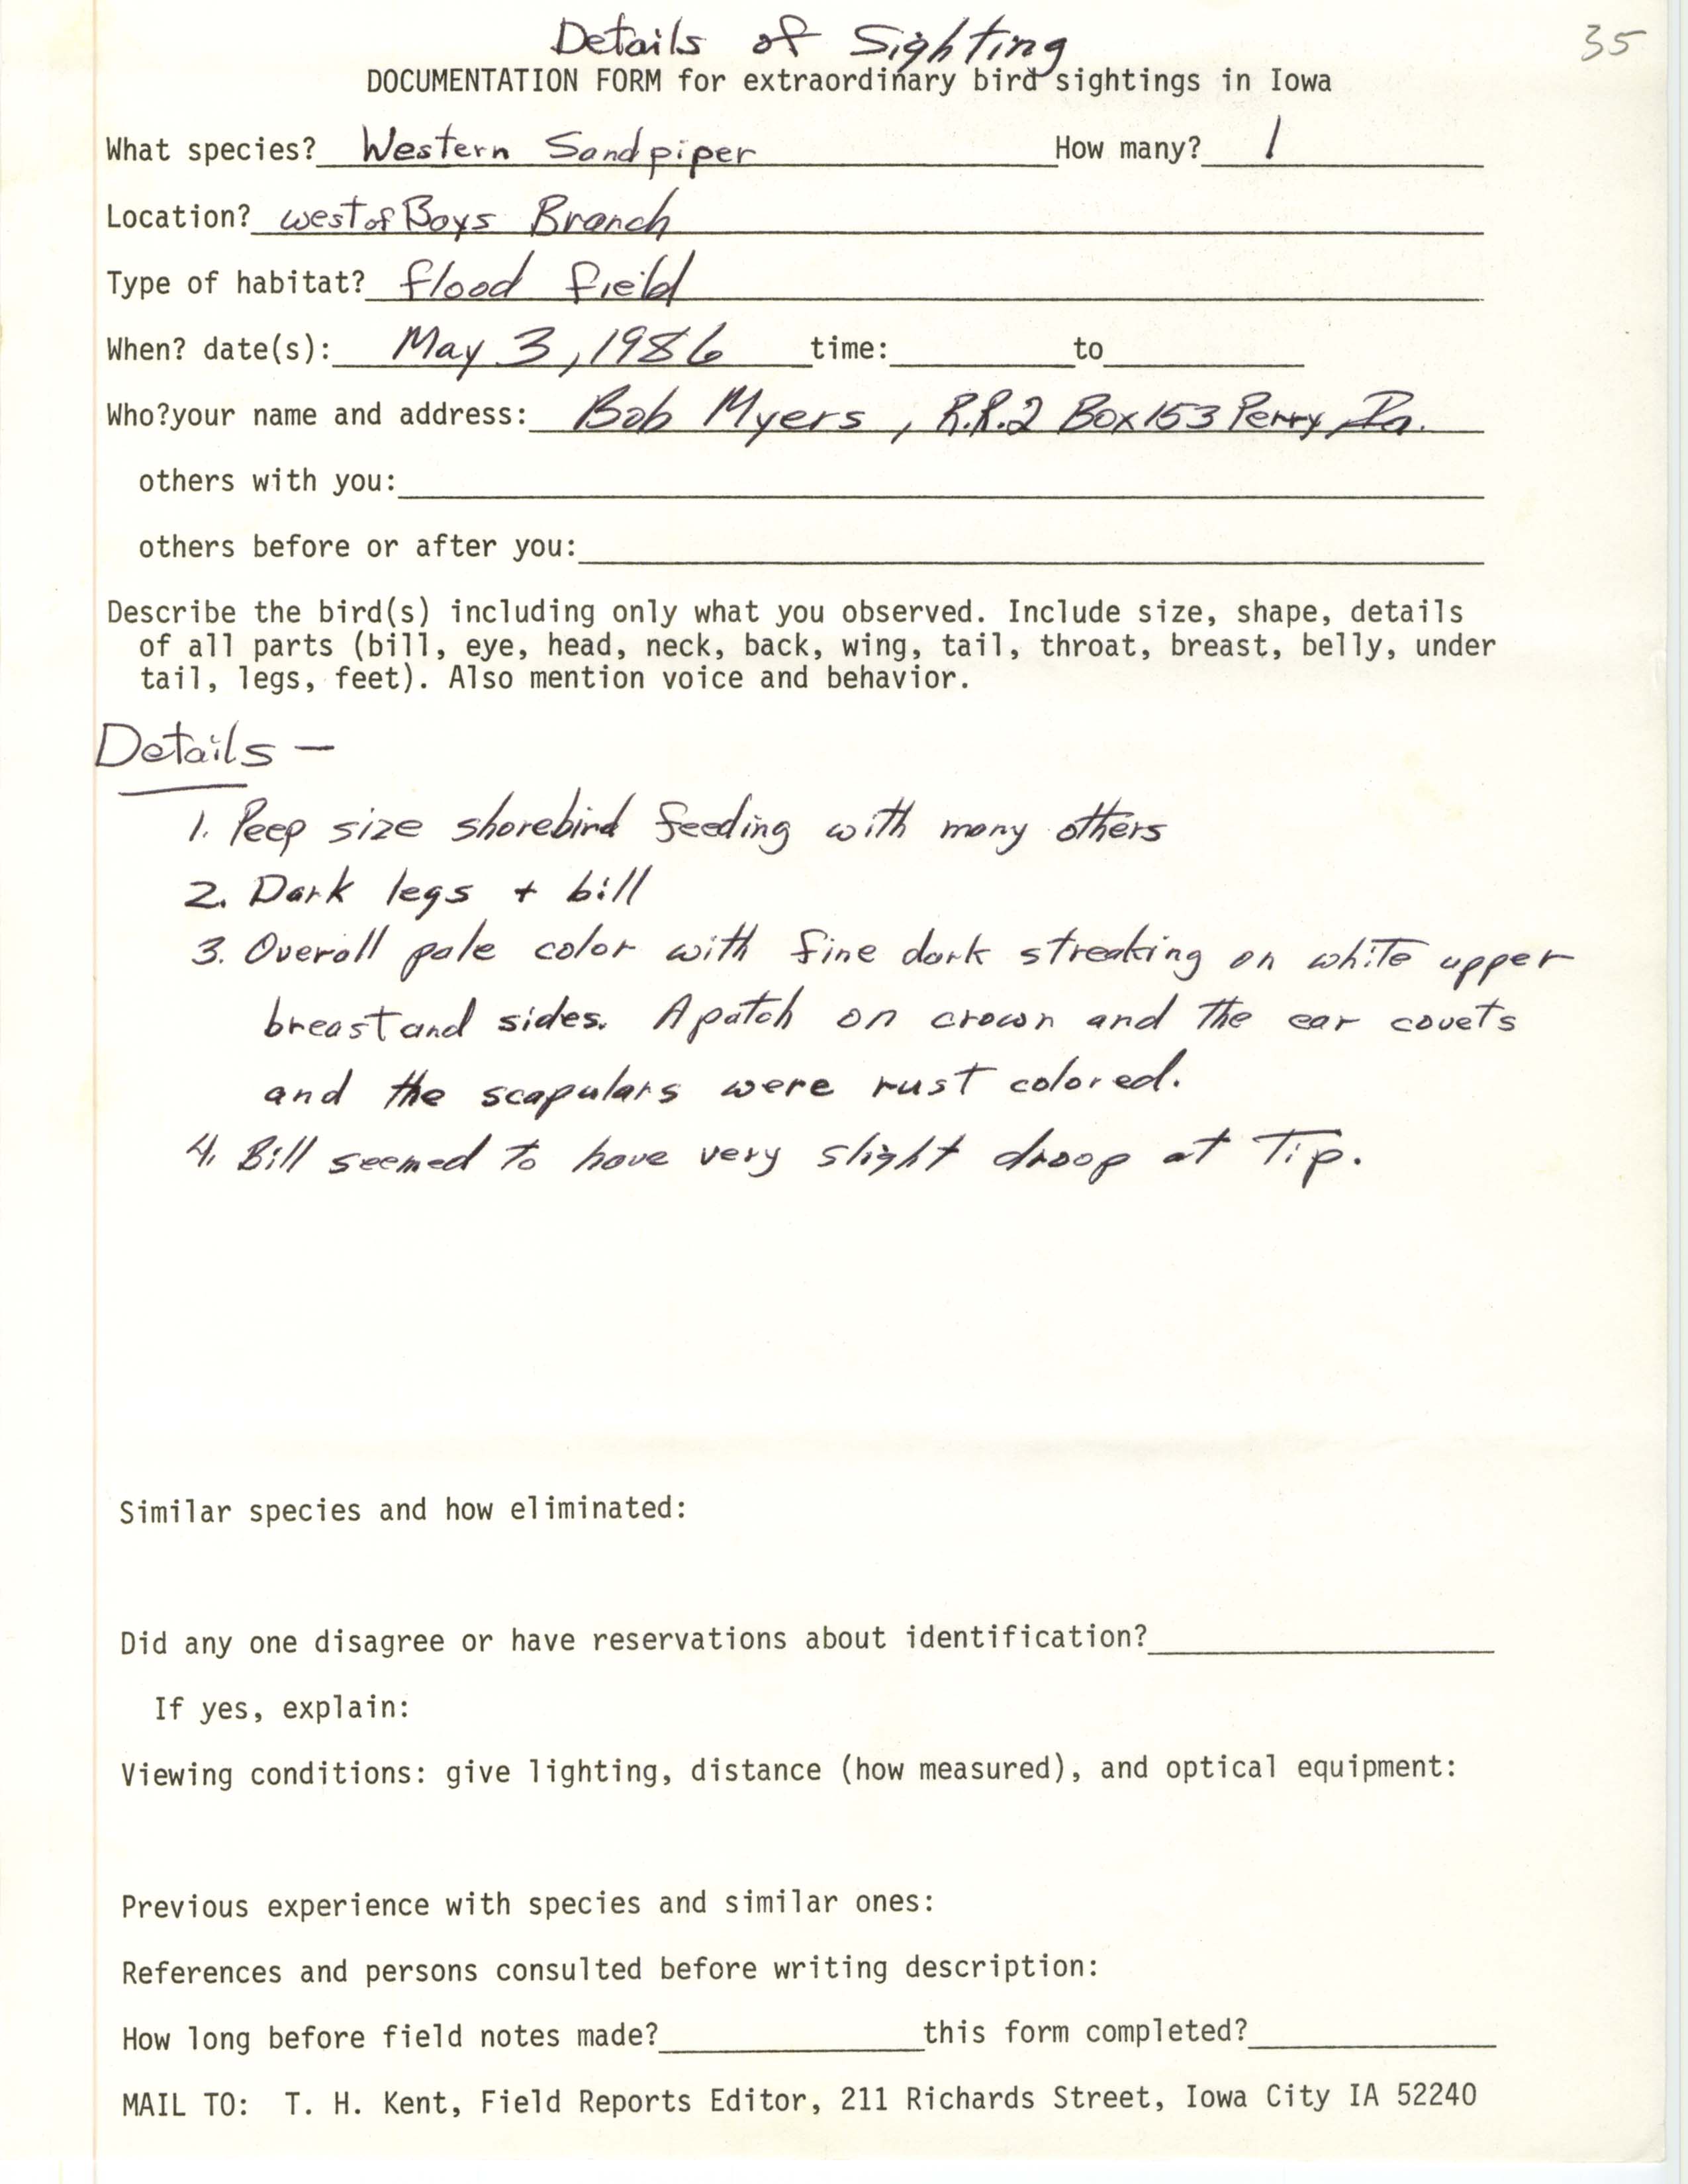 Rare bird documentation form for Western Sandpiper at Bays Branch in 1986